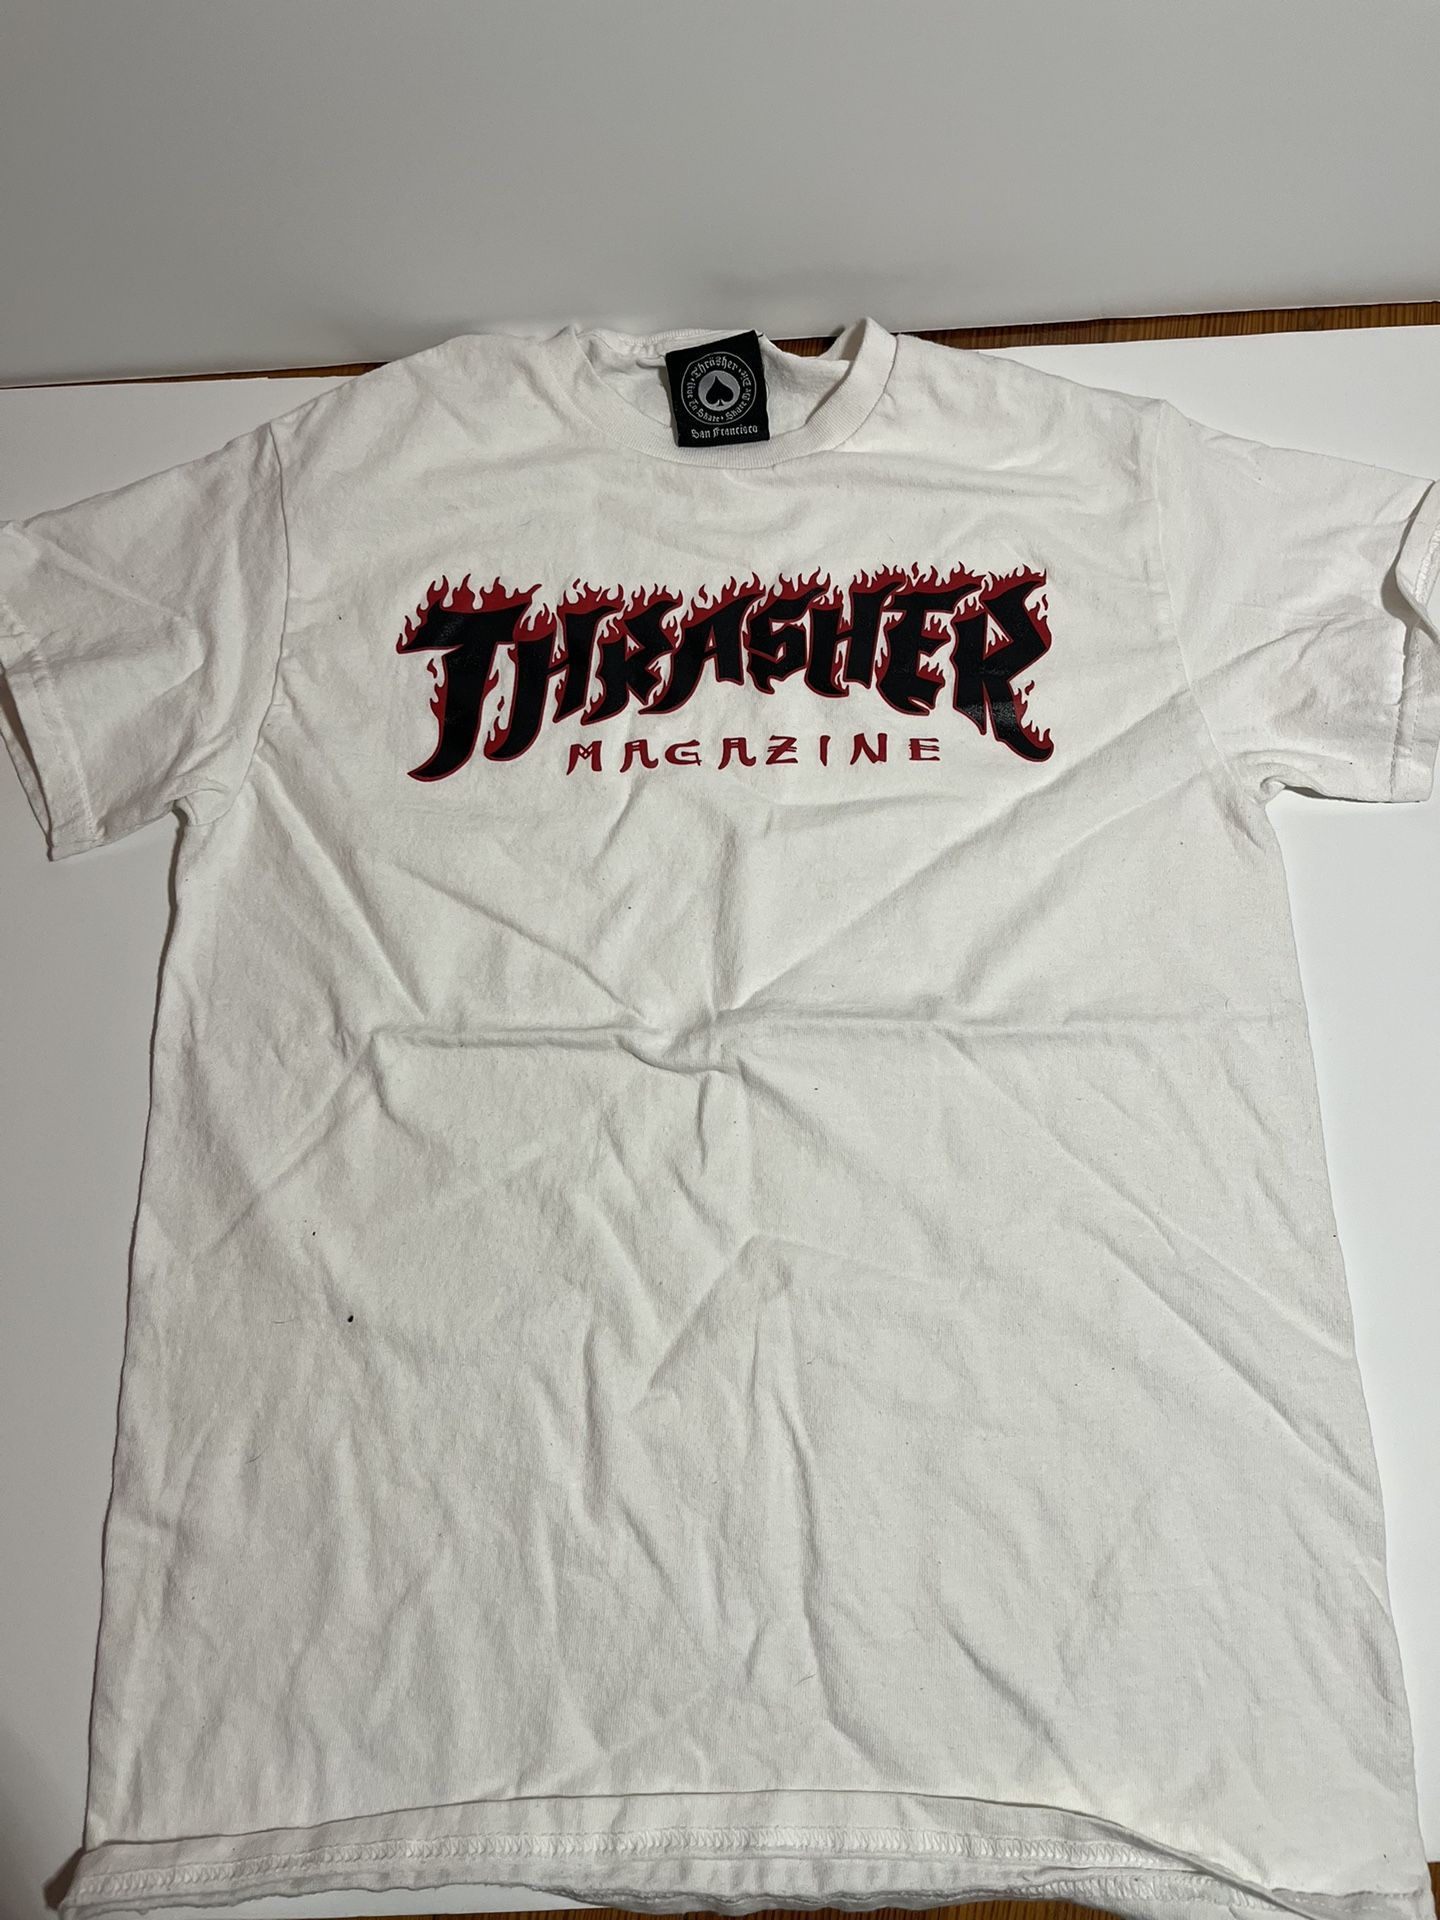 Black Red Thrasher Tee From Lynch Converse Event Size Small